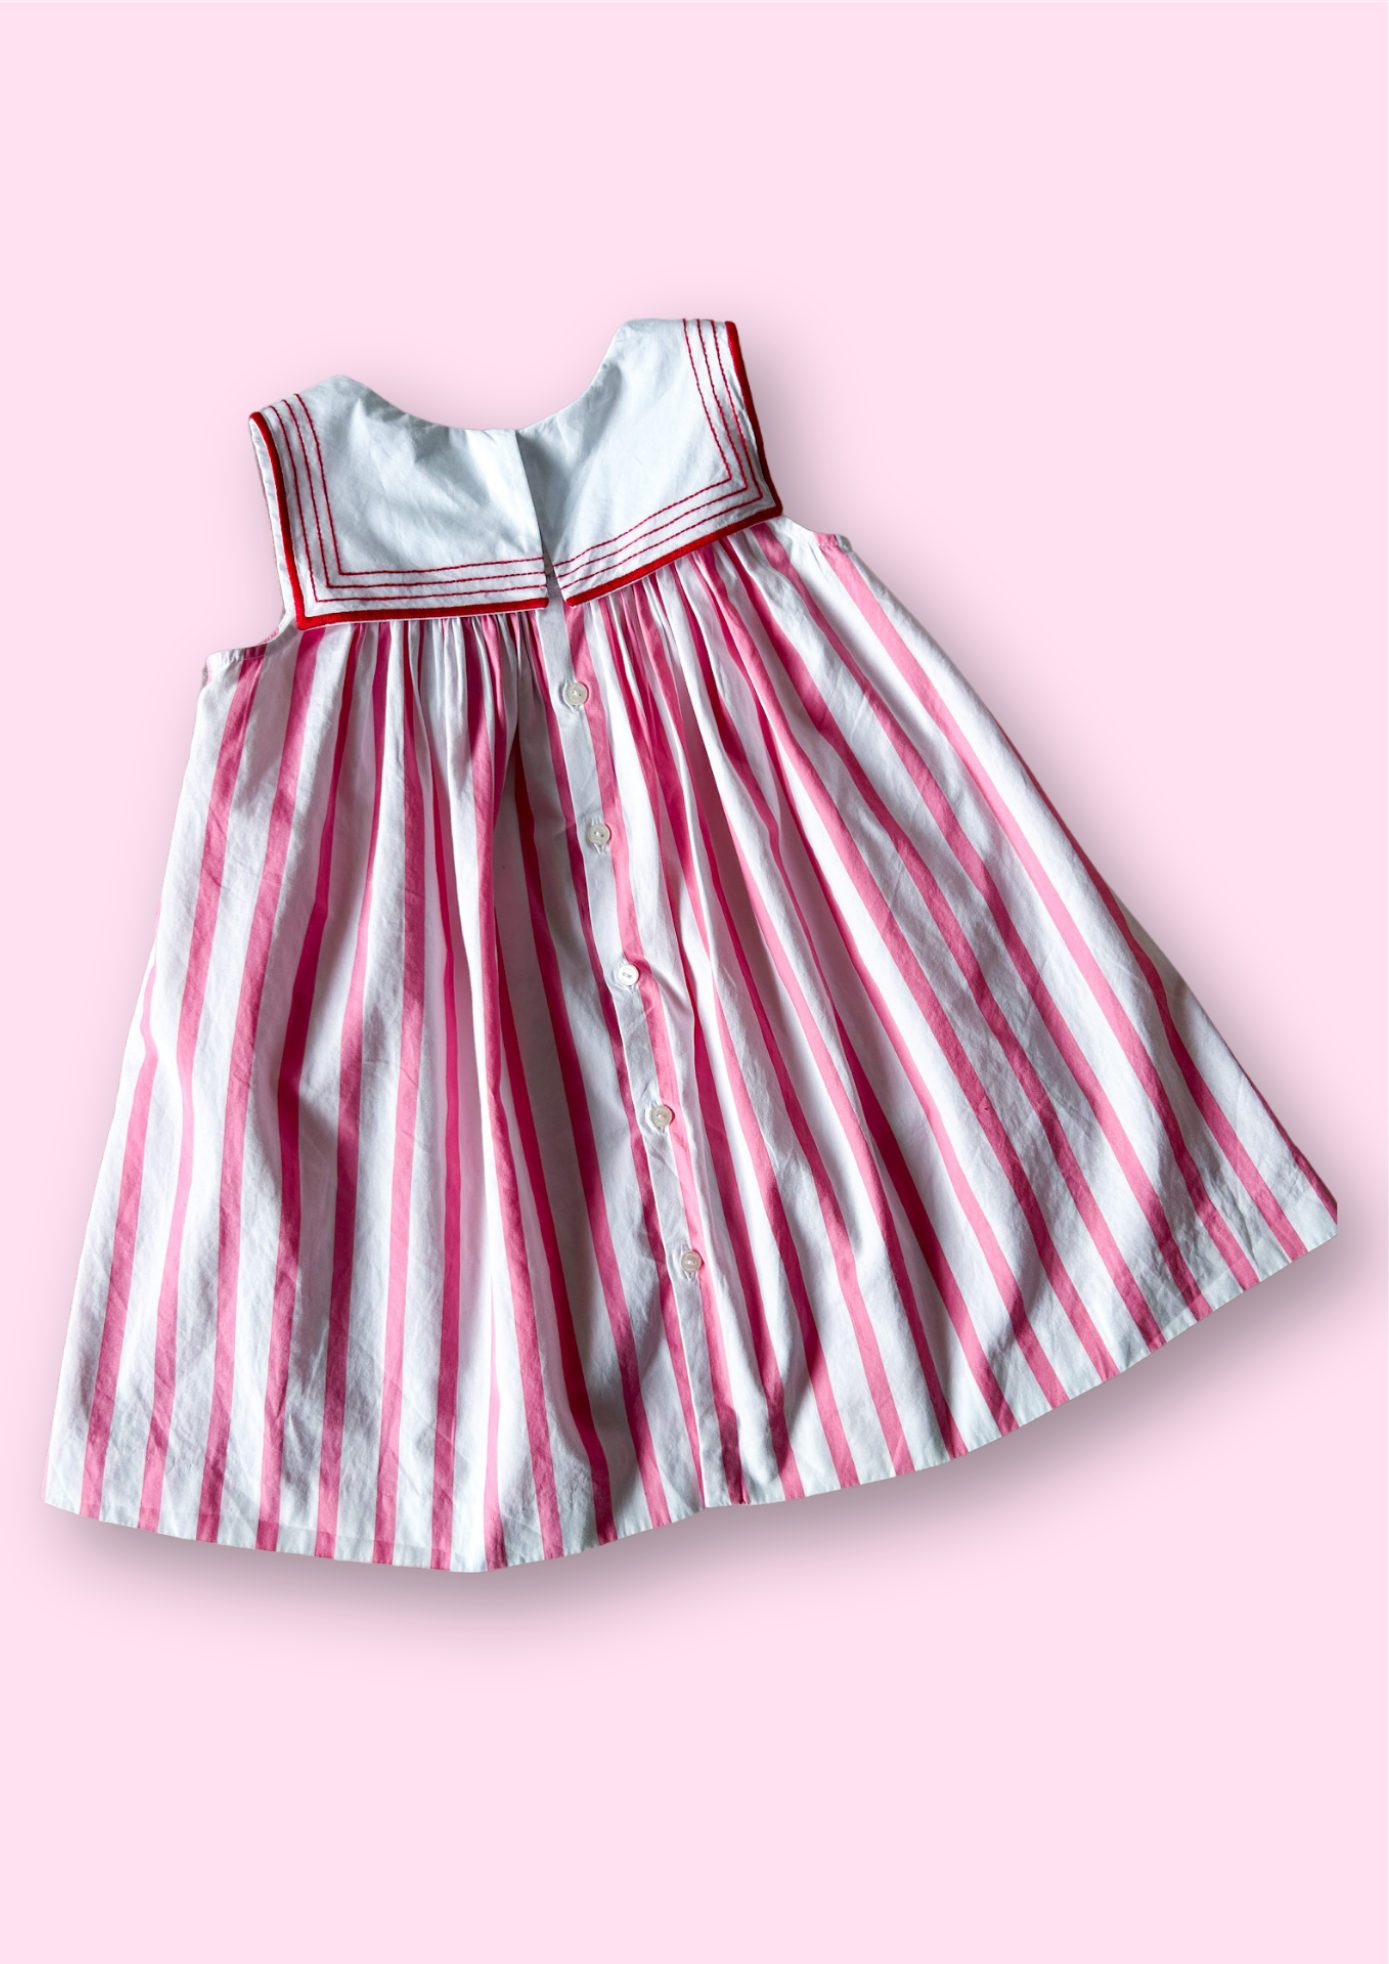 Vintage Stripe Sailor Collar Dress, approx 2-3 years